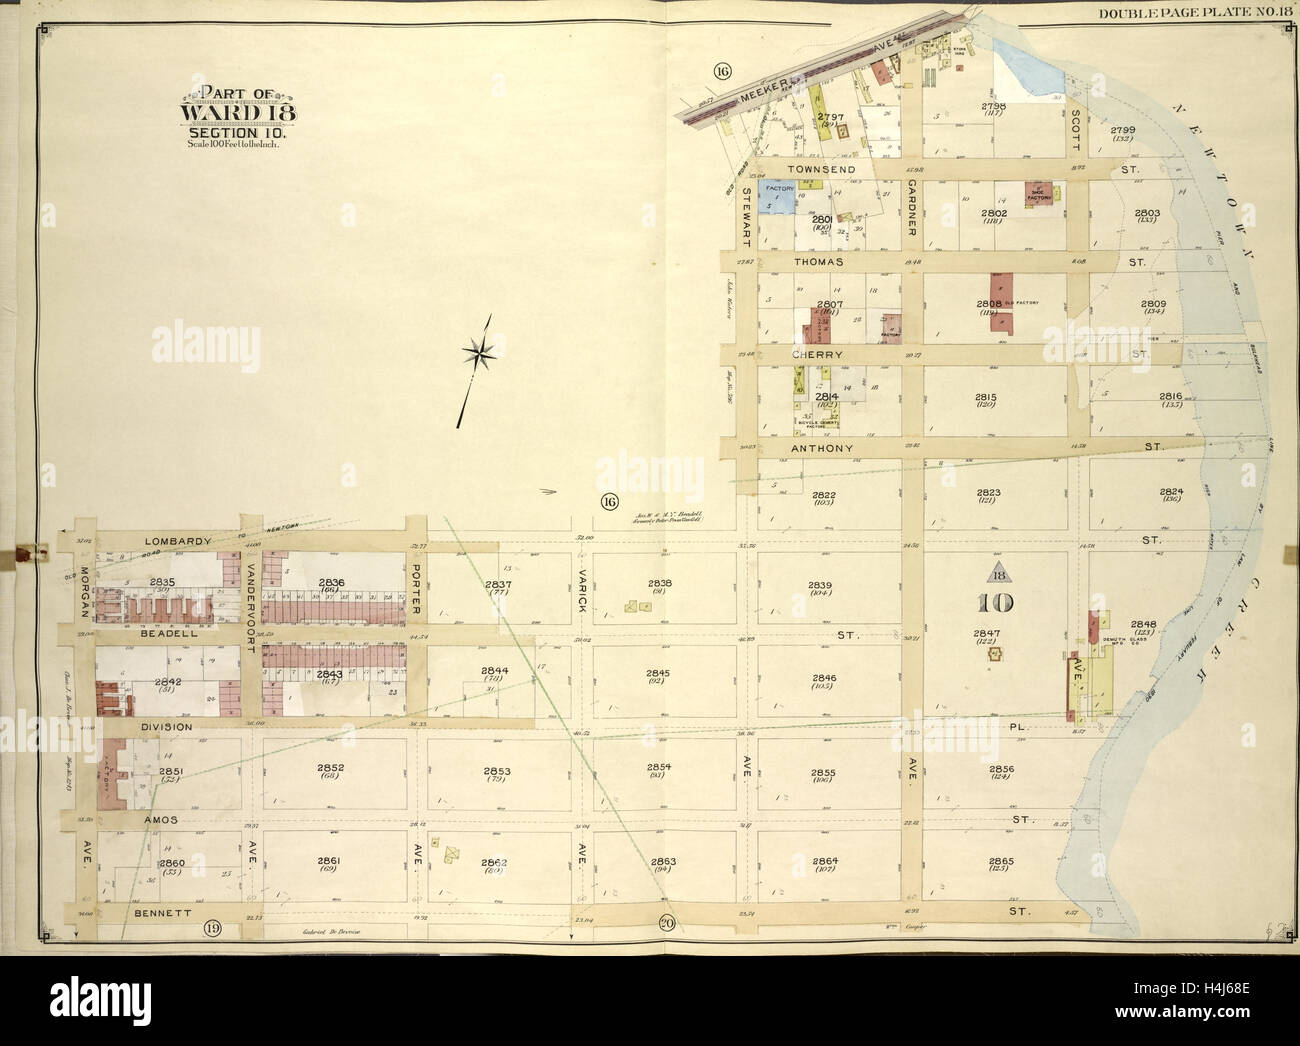 Brooklyn, Vol. 3, Double Page Plate No. 18; Part of Ward 18, Section 10; Map bounded by Meeker Ave., Newtown Creek, Bennett St. Stock Photo